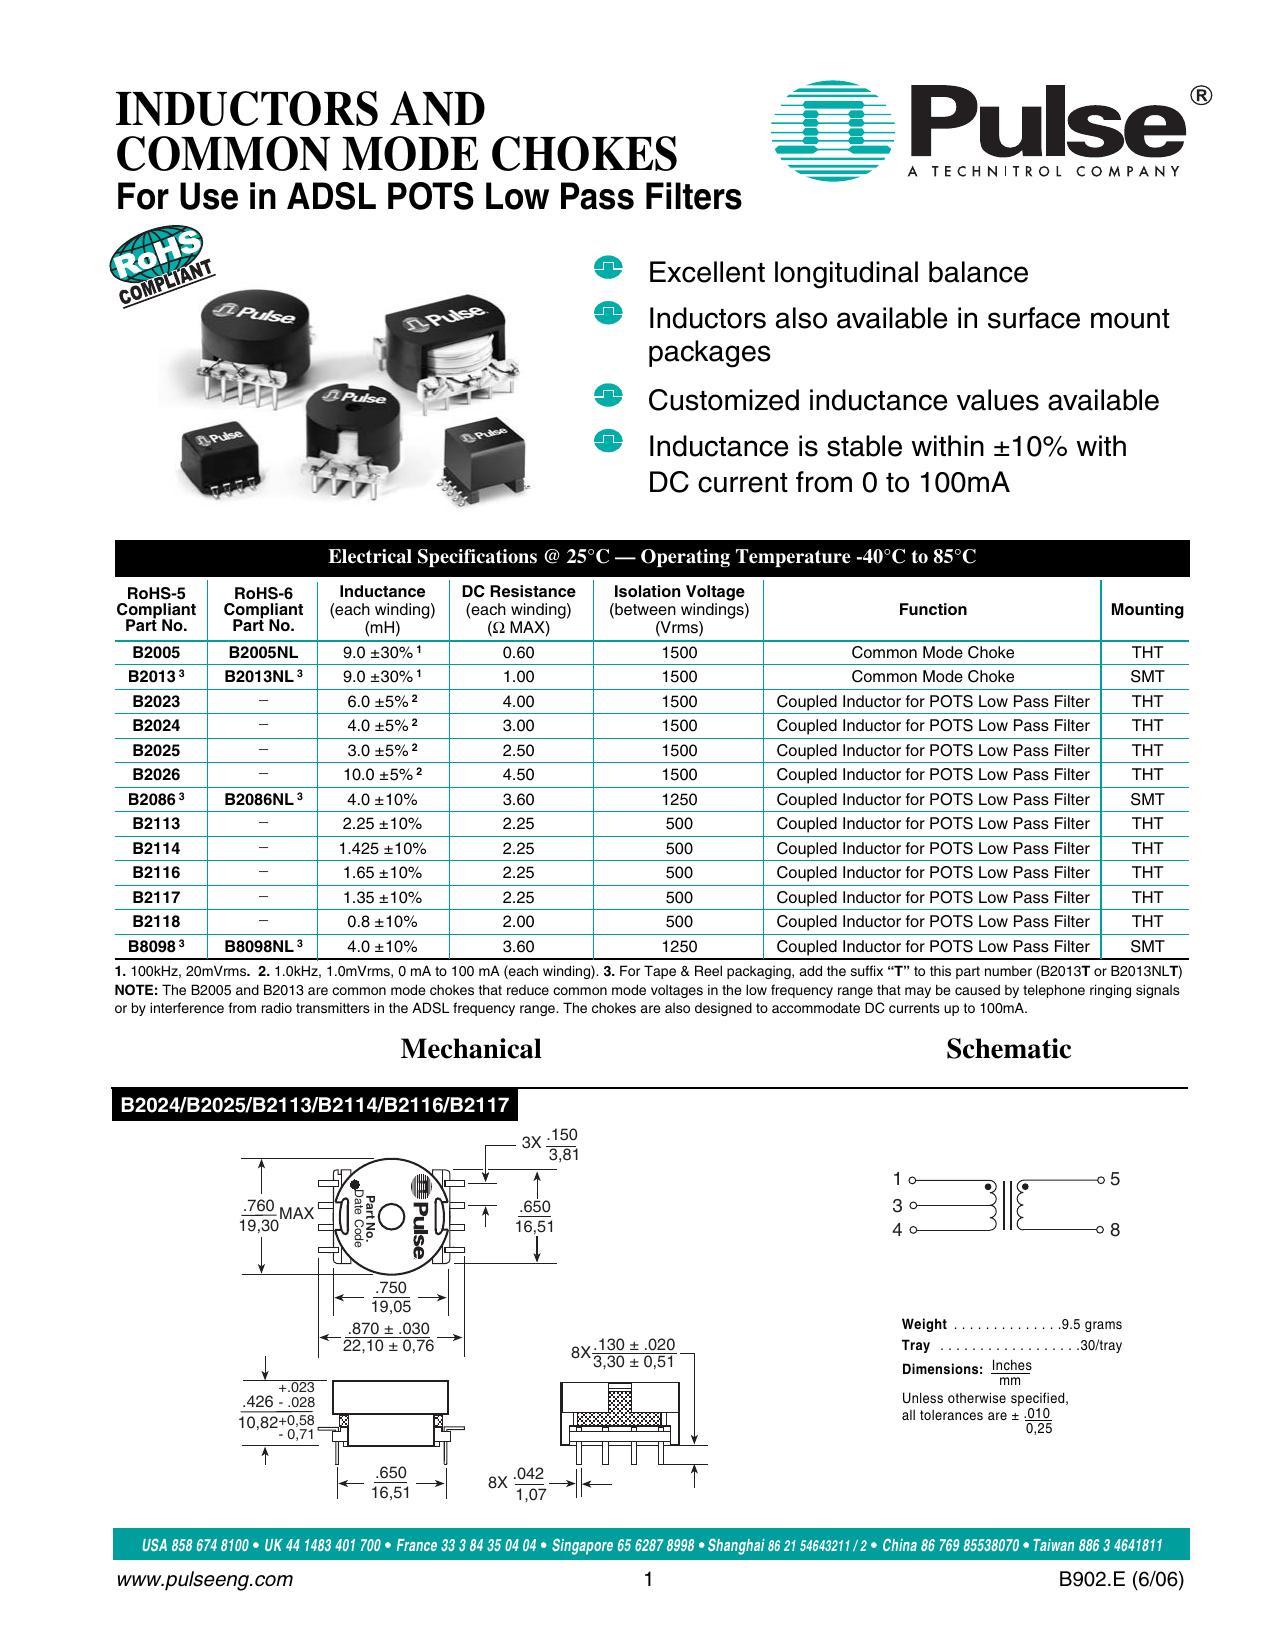 inductors-and-common-mode-chokes-for-use-in-adsl-pots-low-pass-filters.pdf